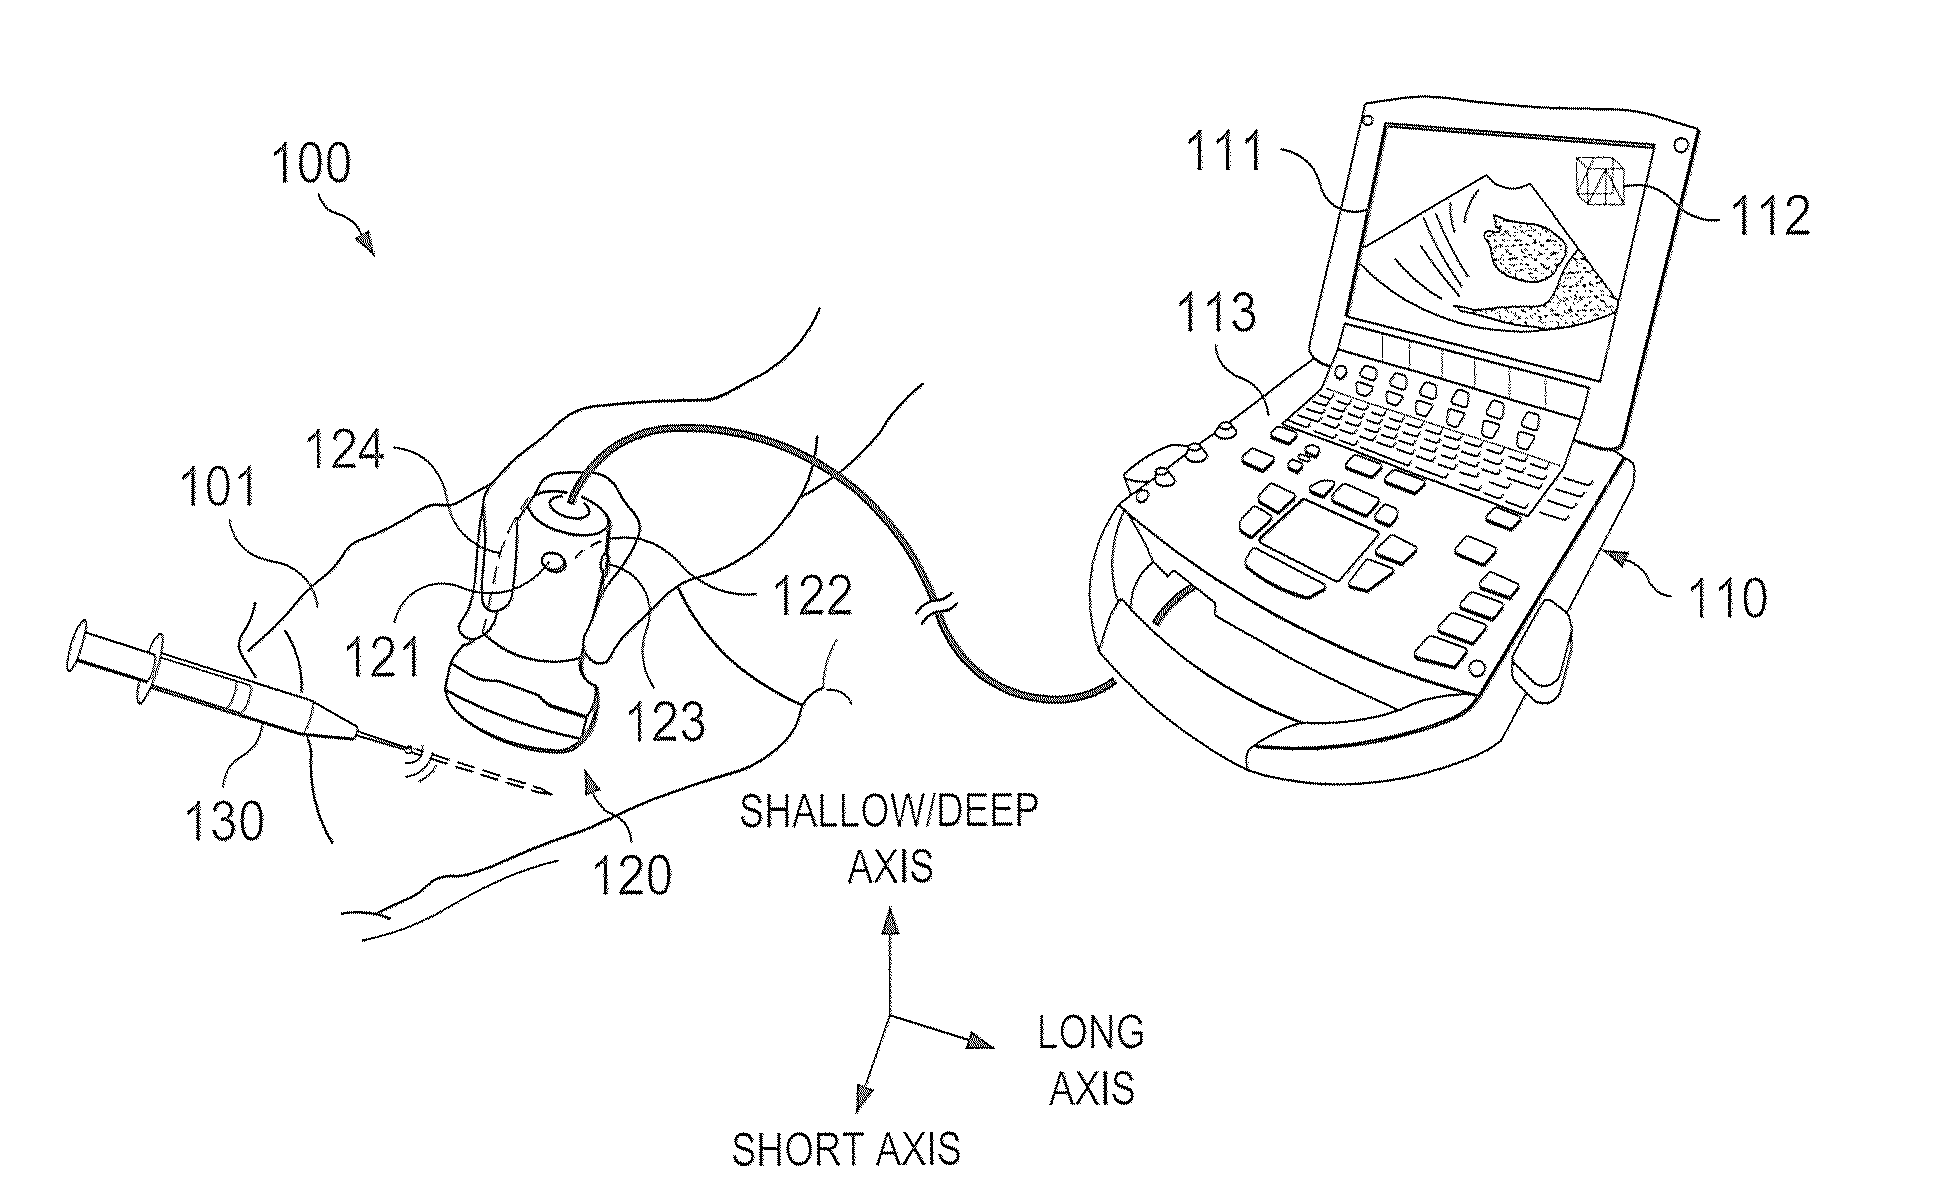 Systems and methods for image presentation for medical examination and interventional procedures